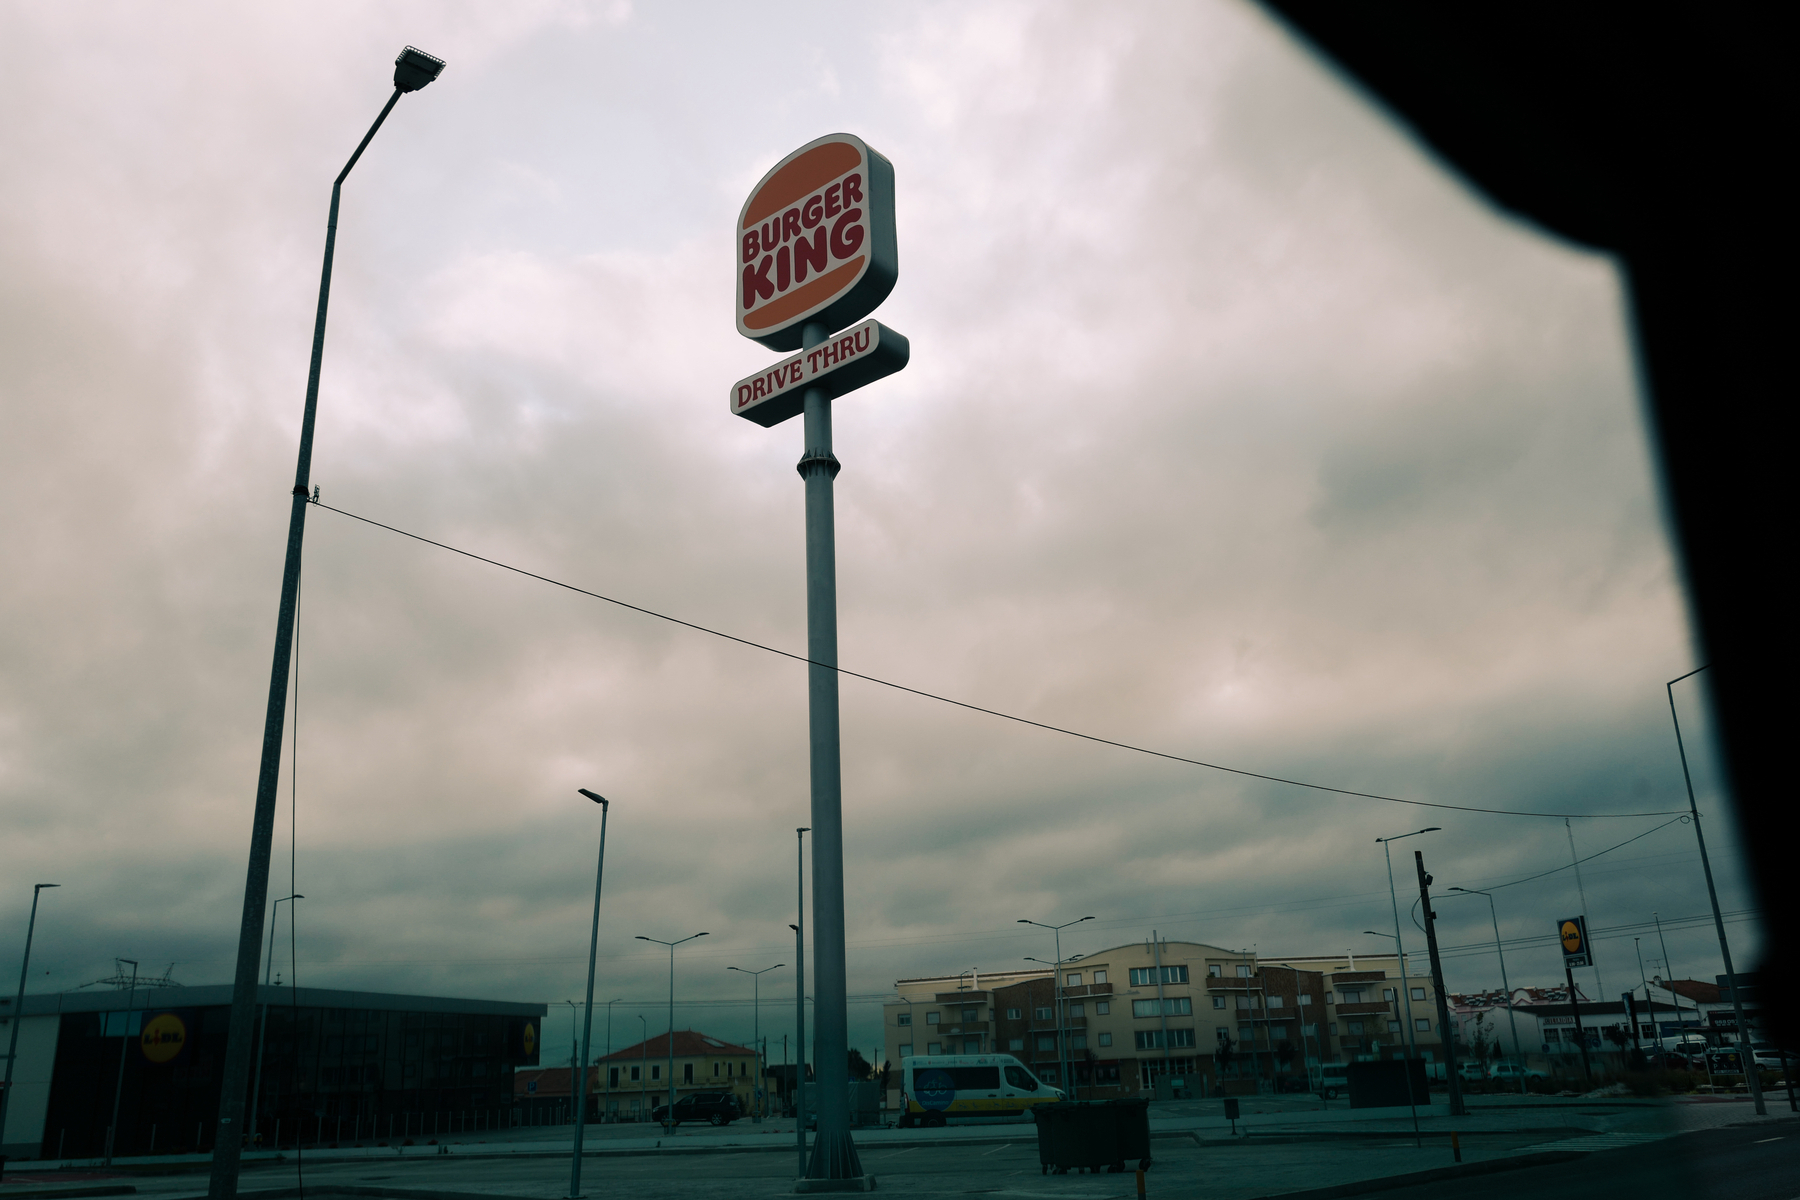 A Burger King sign in the middle of nowhere. 